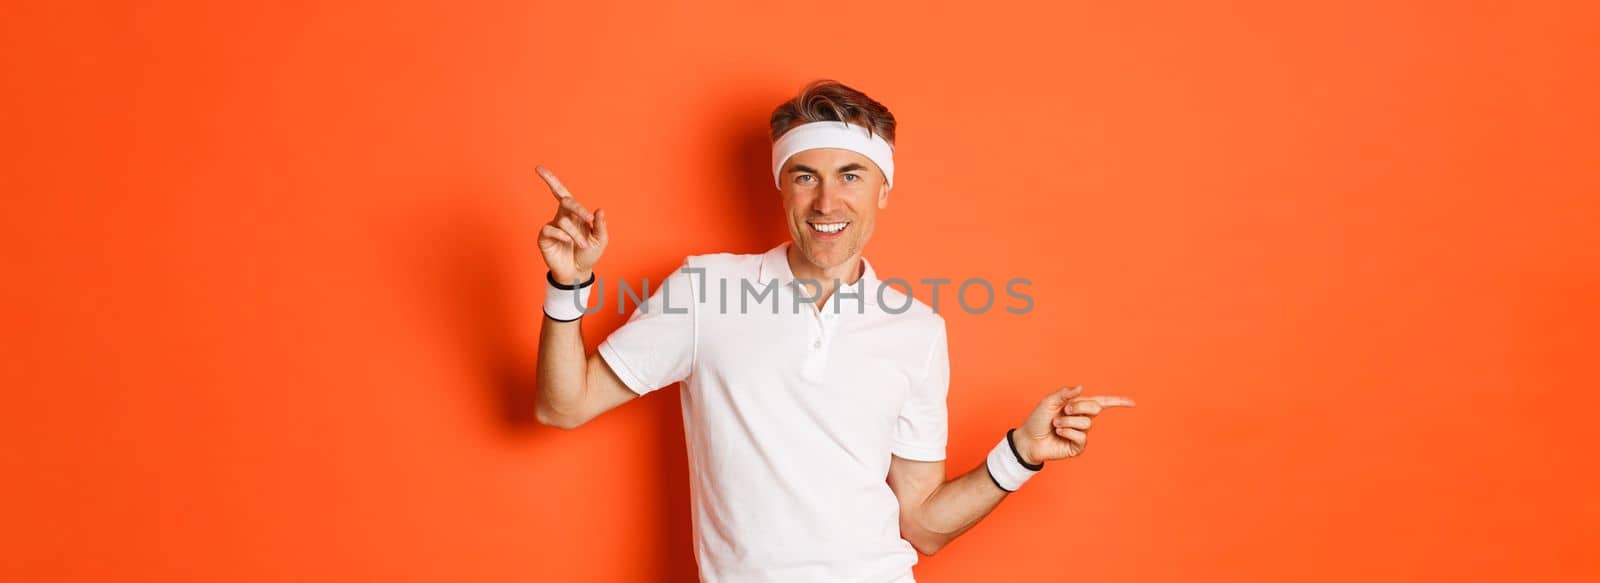 Concept of workout, sports and lifestyle. Portrait of active and healthy middle-aged guy in sportswear, smiling pleased, pointing fingers sideways and showing advertisements.